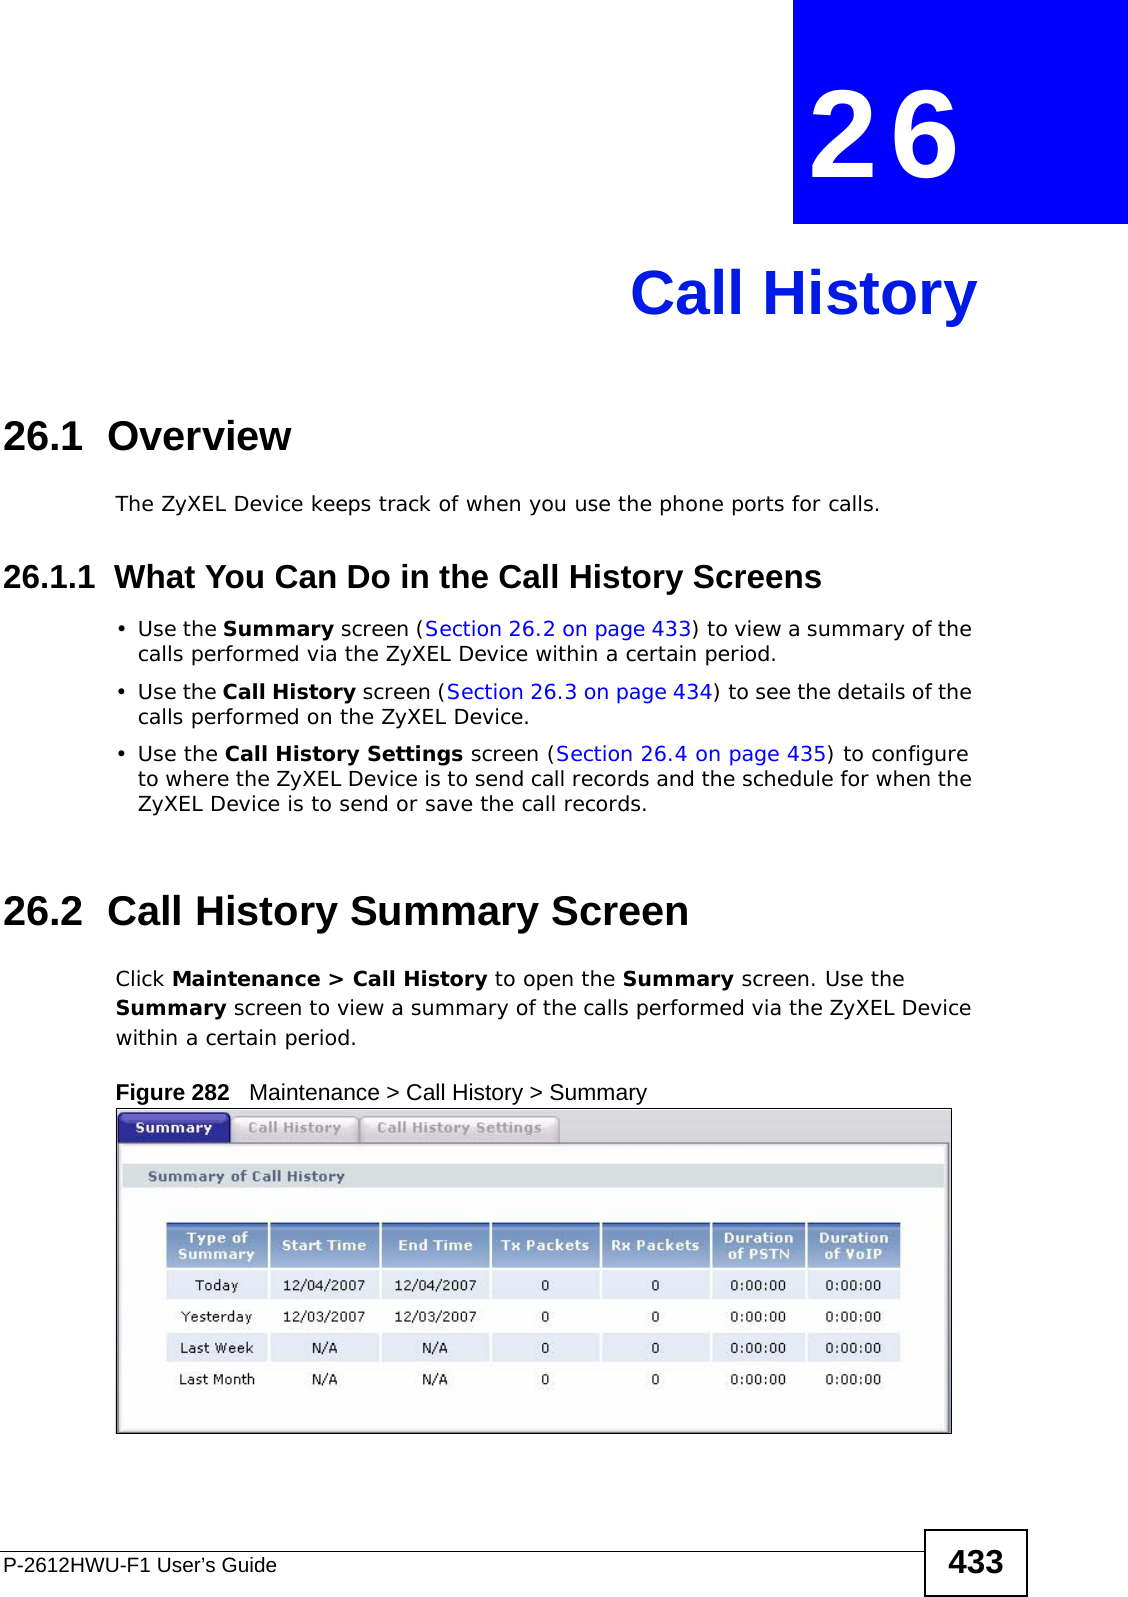 P-2612HWU-F1 User’s Guide 433CHAPTER  26 Call History26.1  OverviewThe ZyXEL Device keeps track of when you use the phone ports for calls. 26.1.1  What You Can Do in the Call History Screens•Use the Summary screen (Section 26.2 on page 433) to view a summary of the calls performed via the ZyXEL Device within a certain period.•Use the Call History screen (Section 26.3 on page 434) to see the details of the calls performed on the ZyXEL Device. •Use the Call History Settings screen (Section 26.4 on page 435) to configure to where the ZyXEL Device is to send call records and the schedule for when the ZyXEL Device is to send or save the call records. 26.2  Call History Summary Screen Click Maintenance &gt; Call History to open the Summary screen. Use the Summary screen to view a summary of the calls performed via the ZyXEL Device within a certain period. Figure 282   Maintenance &gt; Call History &gt; Summary 